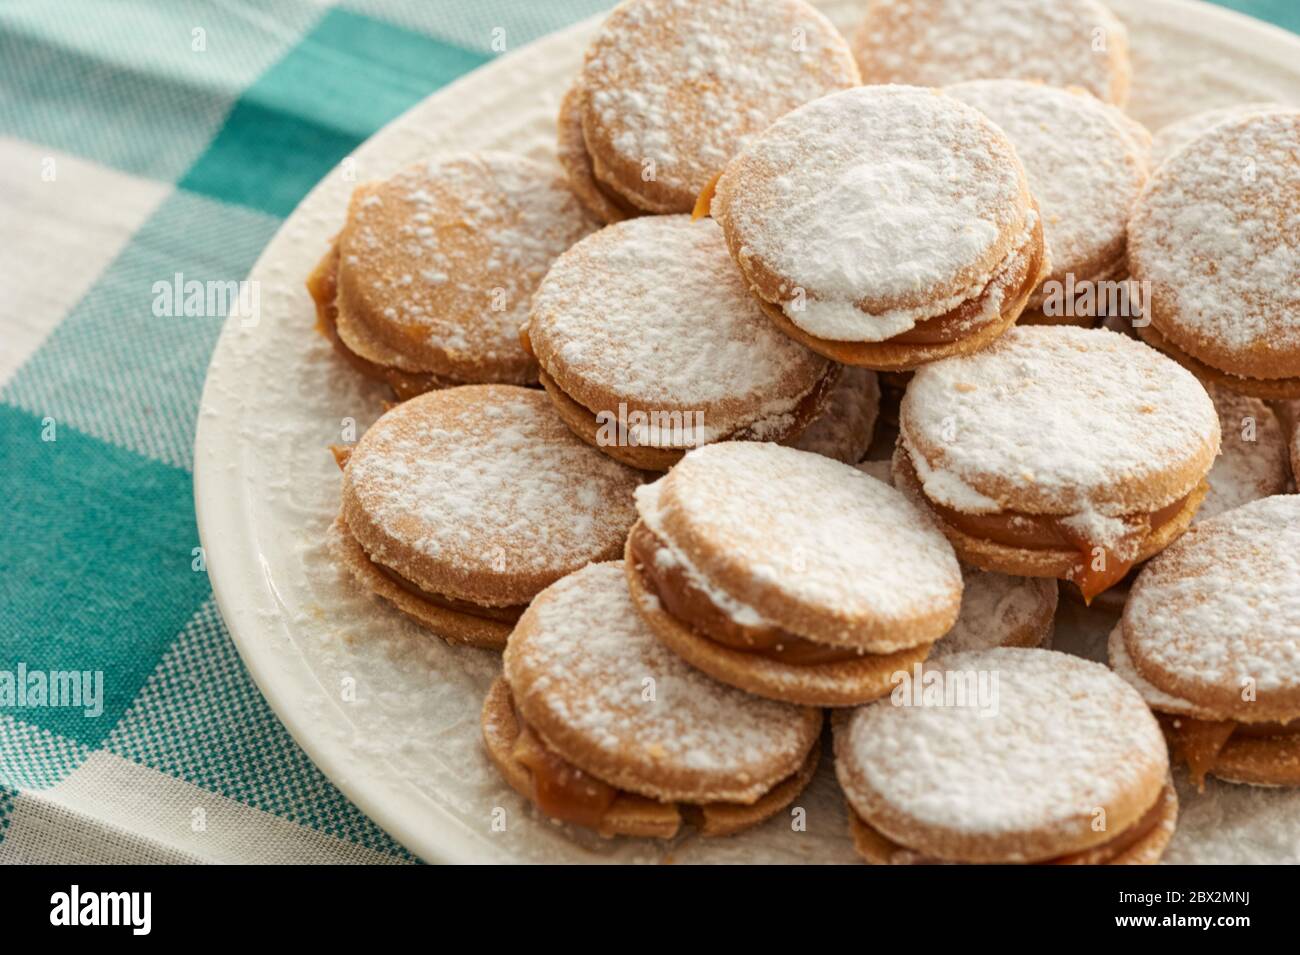 Alfajores: Traditional Peruvian cookies filled with caramel and white sugar dust on top. Stock Photo